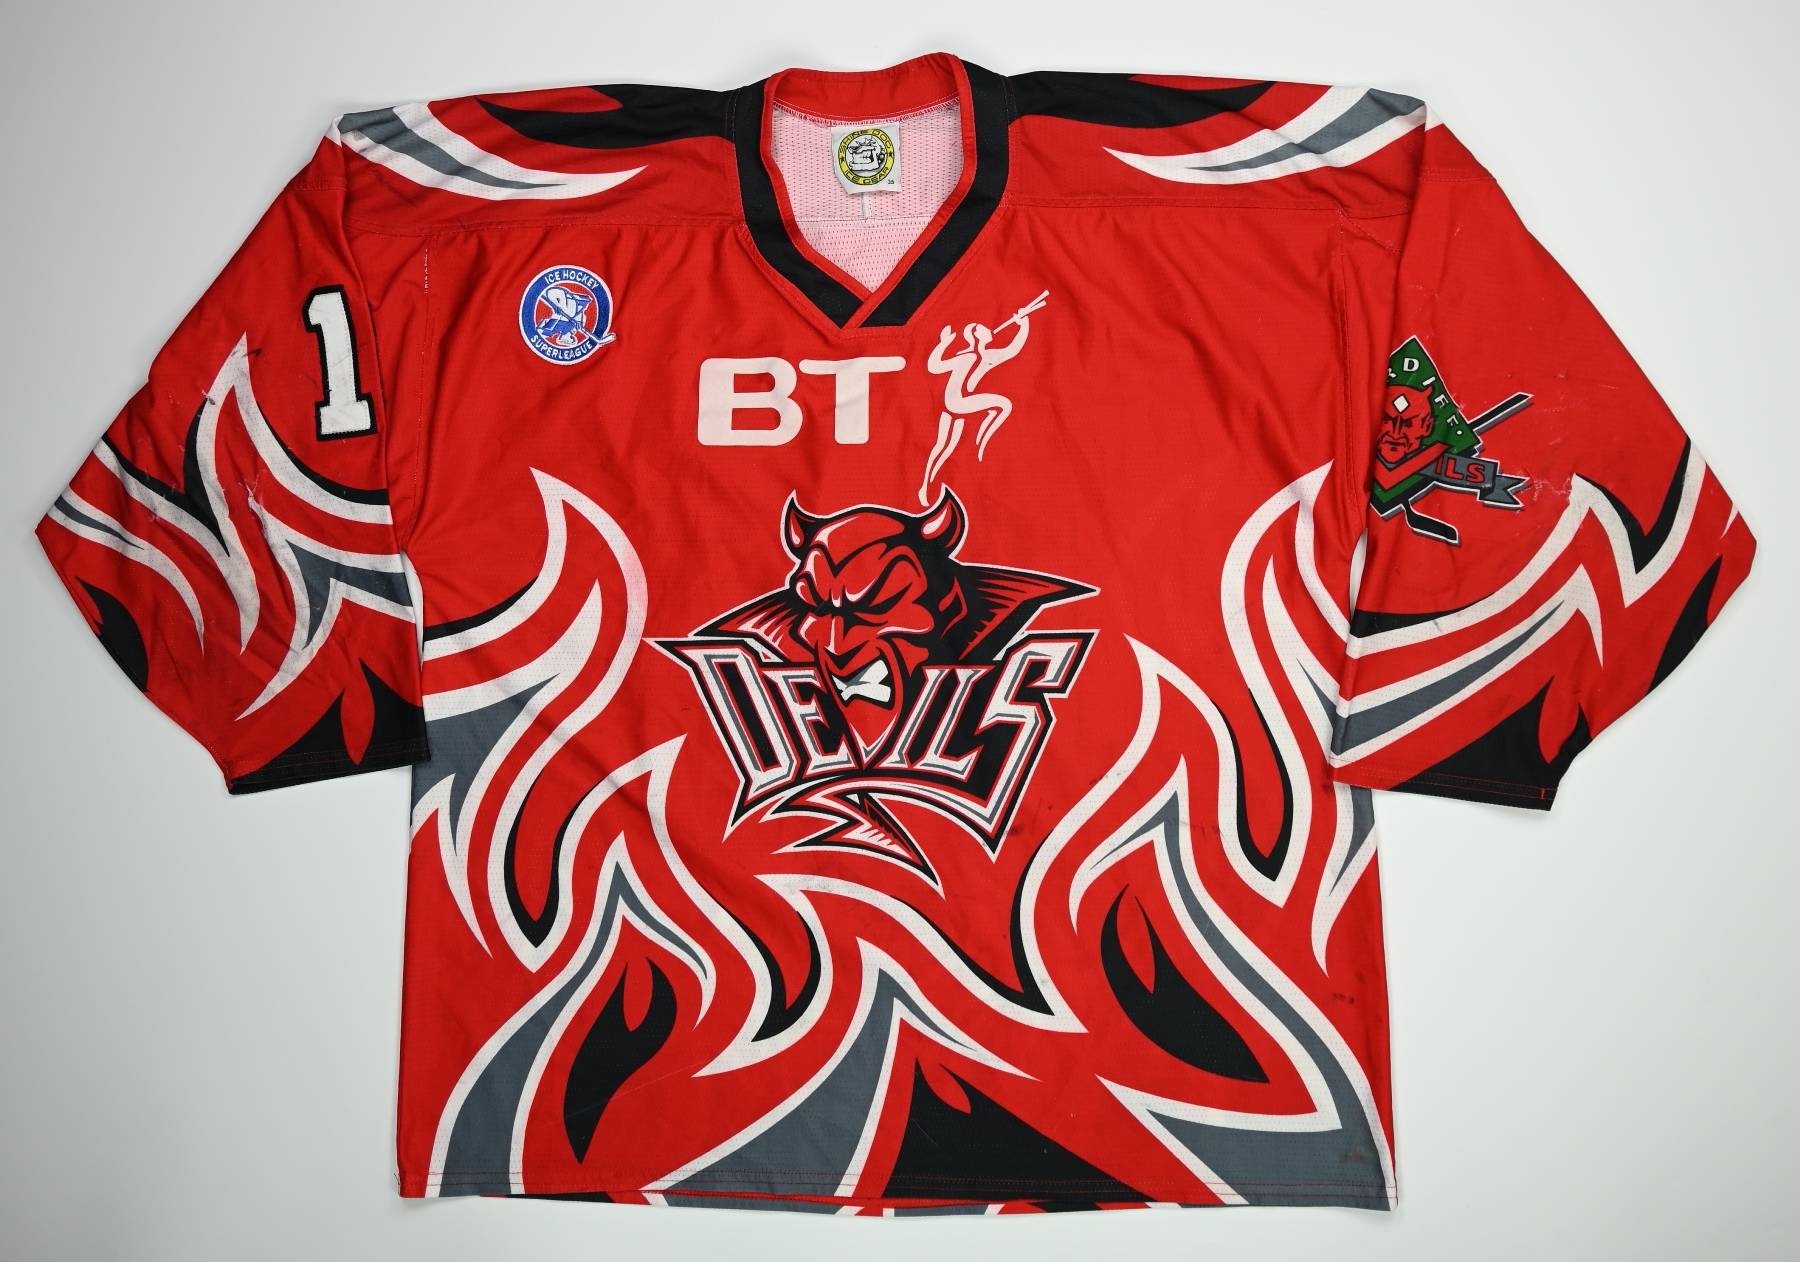 The Cardiff Devils - Big Lou's jersey's up for grabs in tonight's SOHB 😈👕